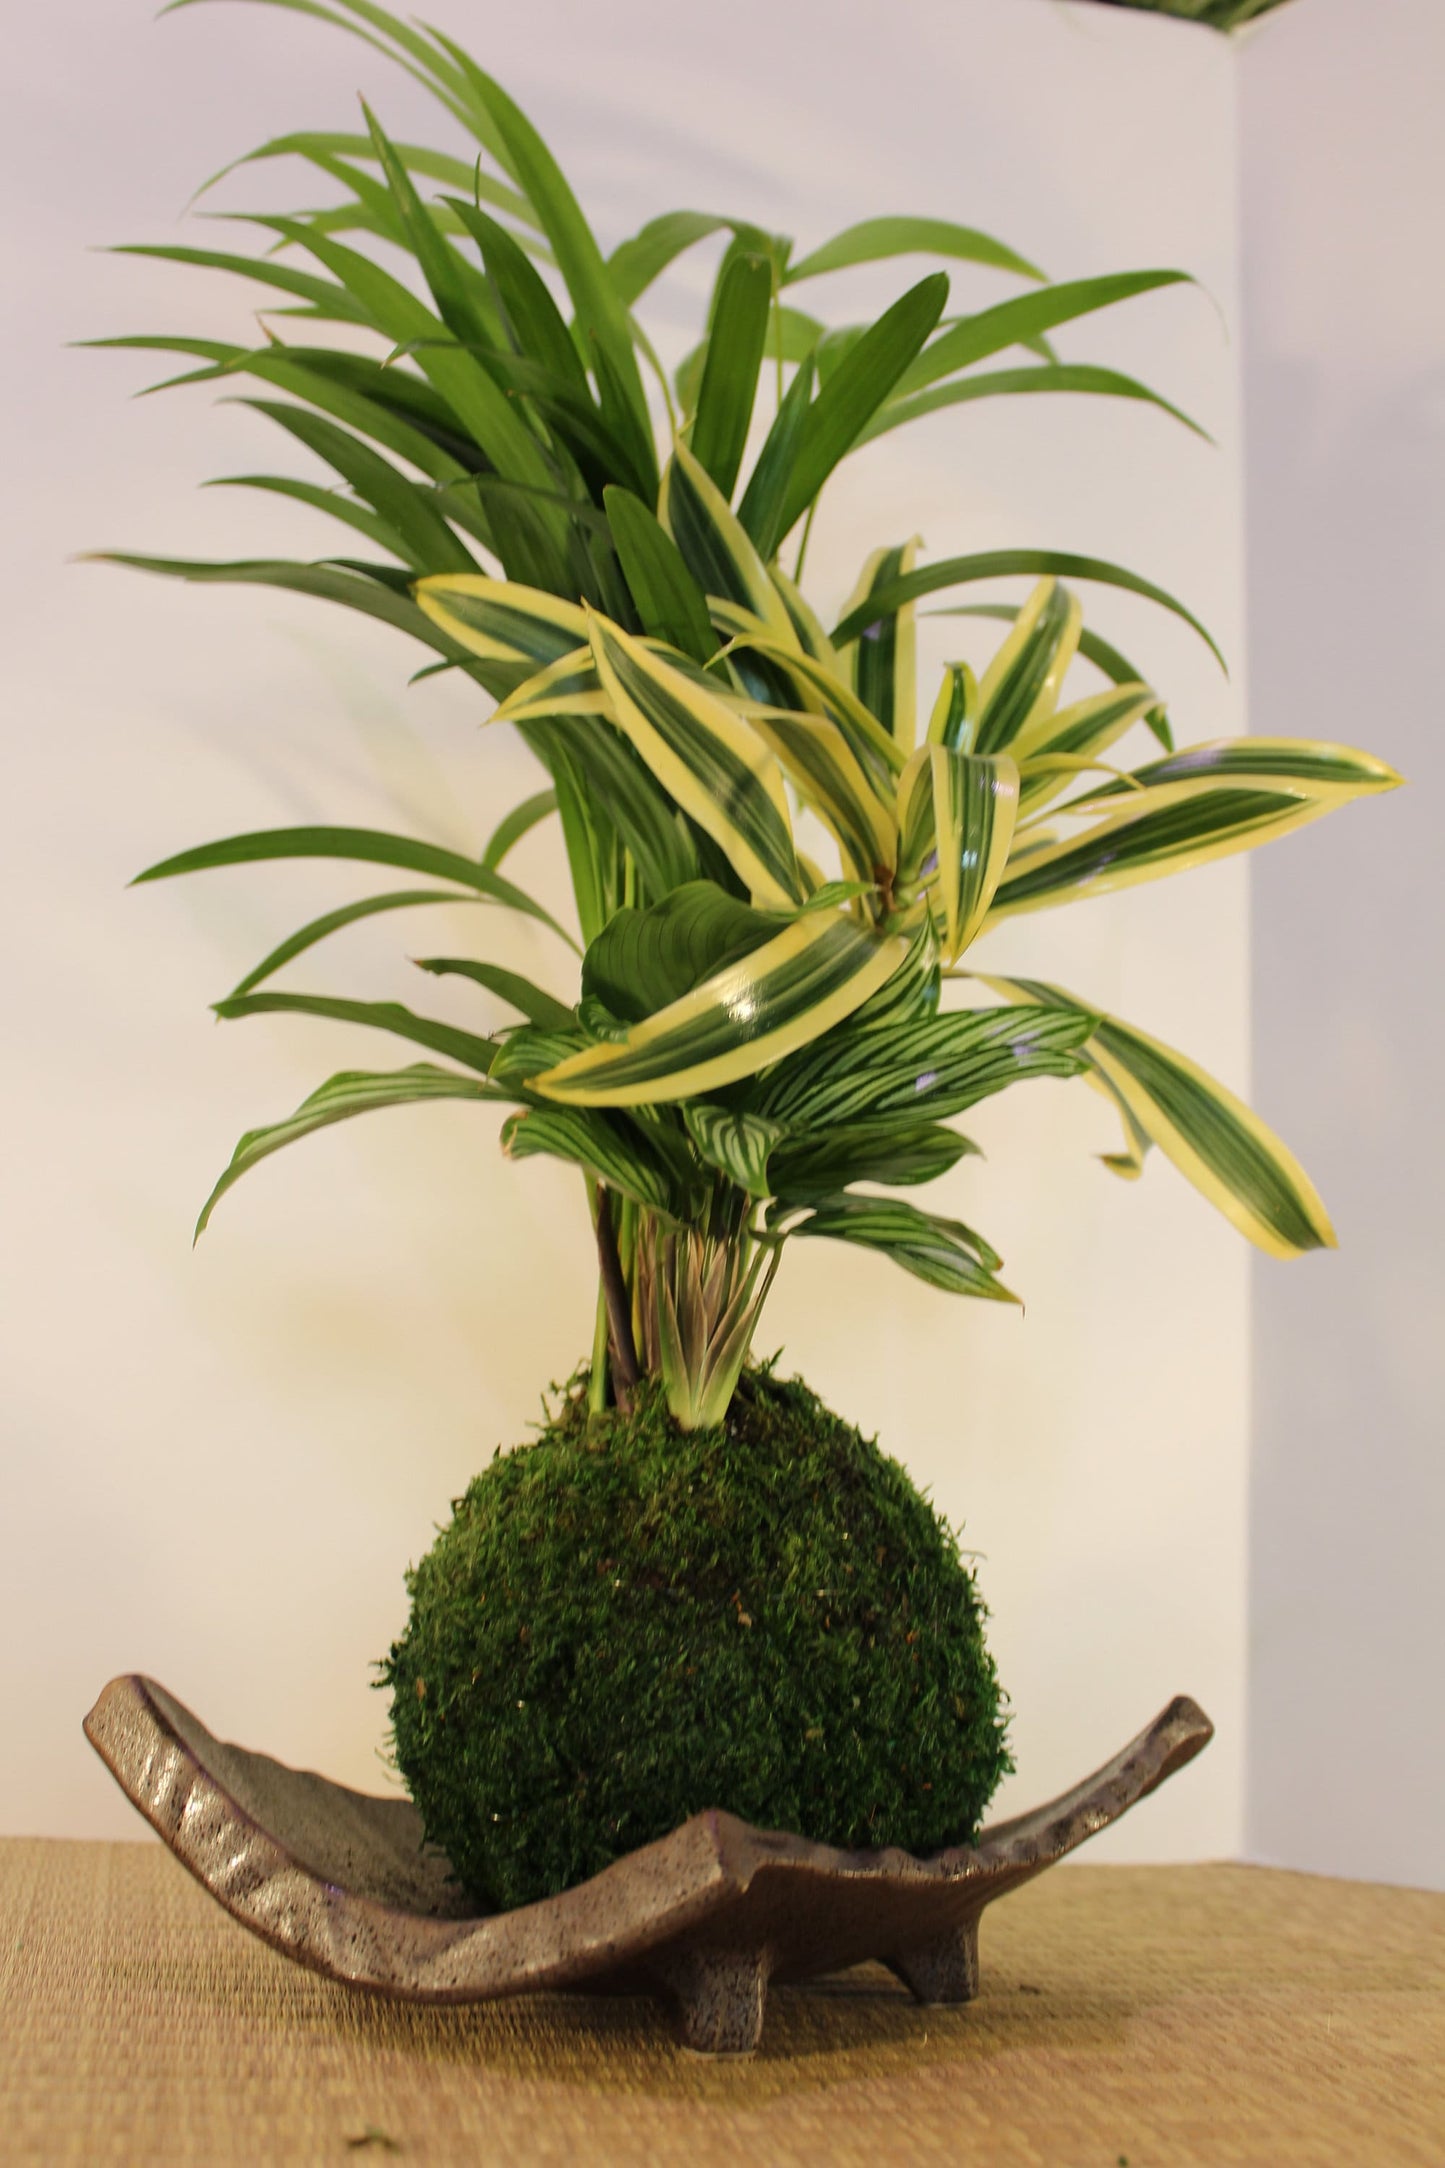 Arranged kokedama with Maya Palm, Song of India, and striped calathea-- Bonsai Moss ball -  house decor with Japanese technique plants!